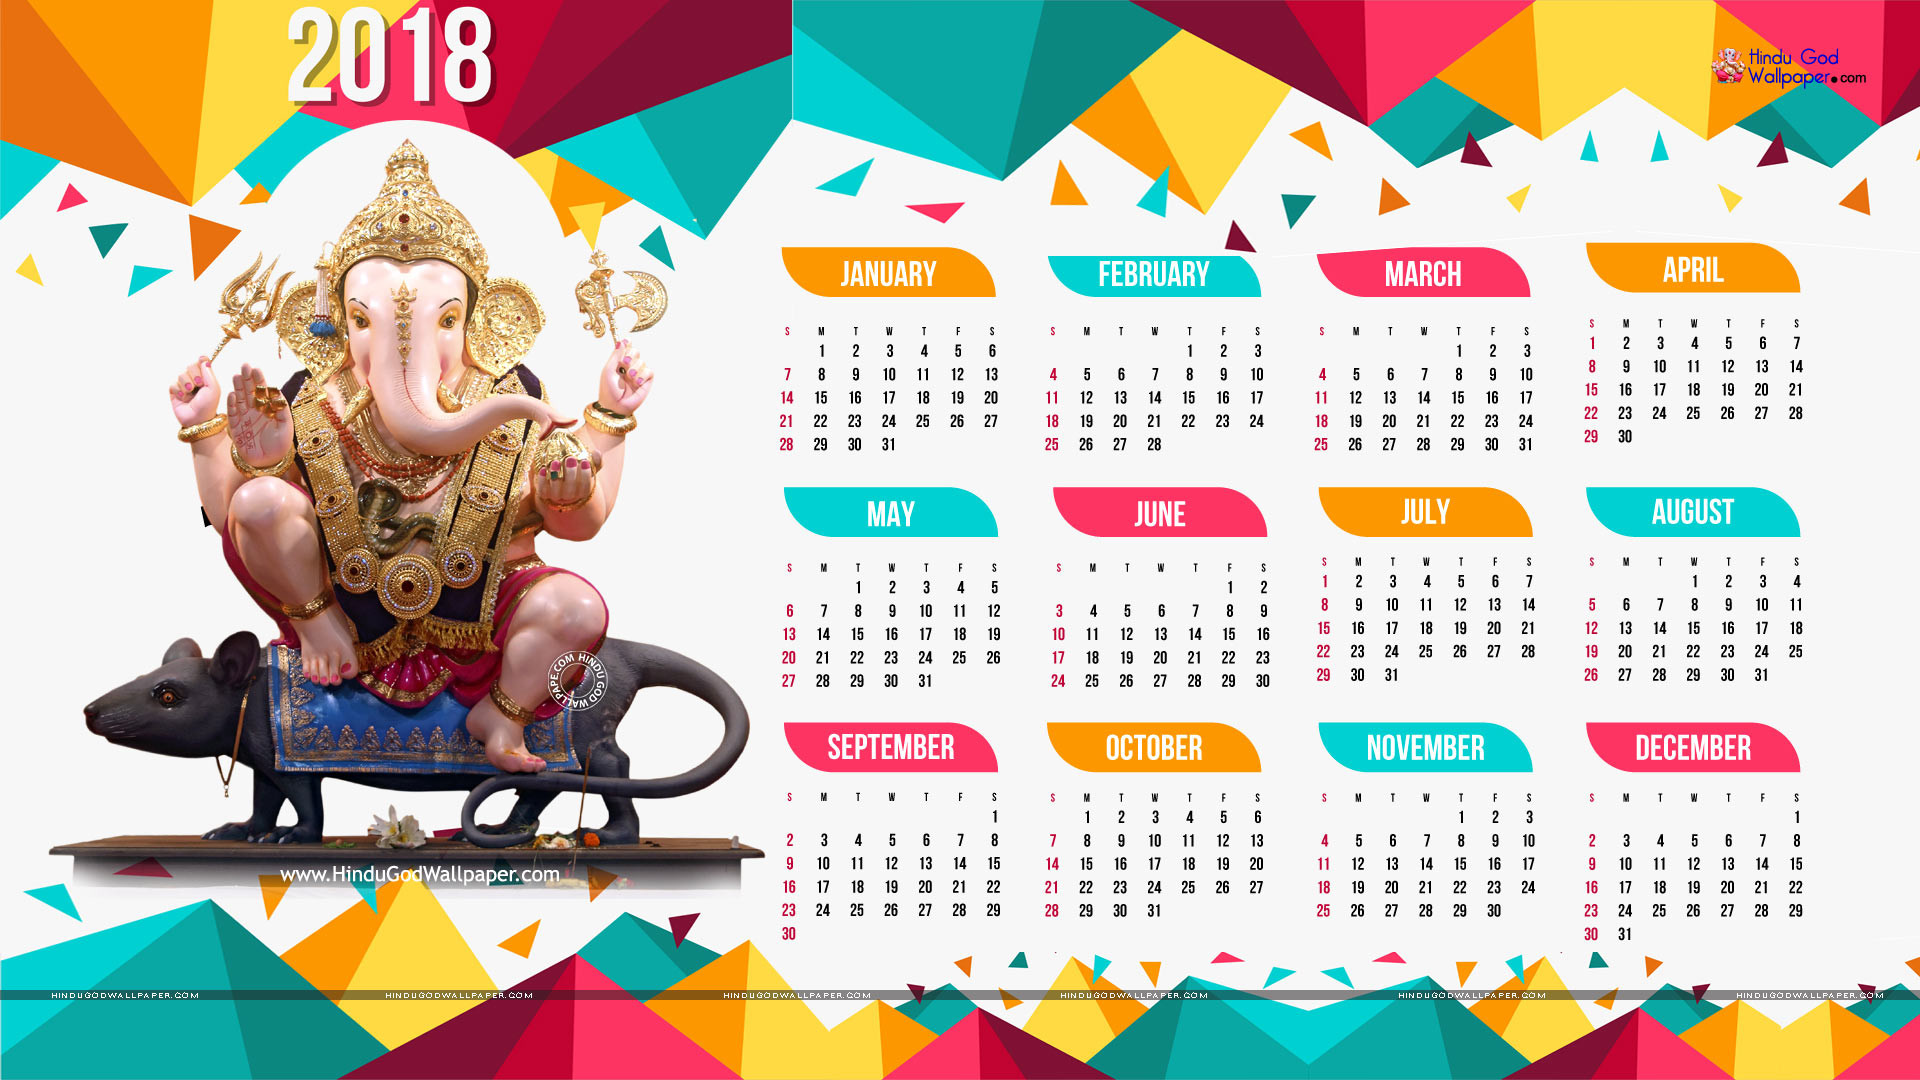 Data Src Top Wallpapers With Calendar 2018 For Htc - Calendar 2018 Wallpaper For Desktop - HD Wallpaper 